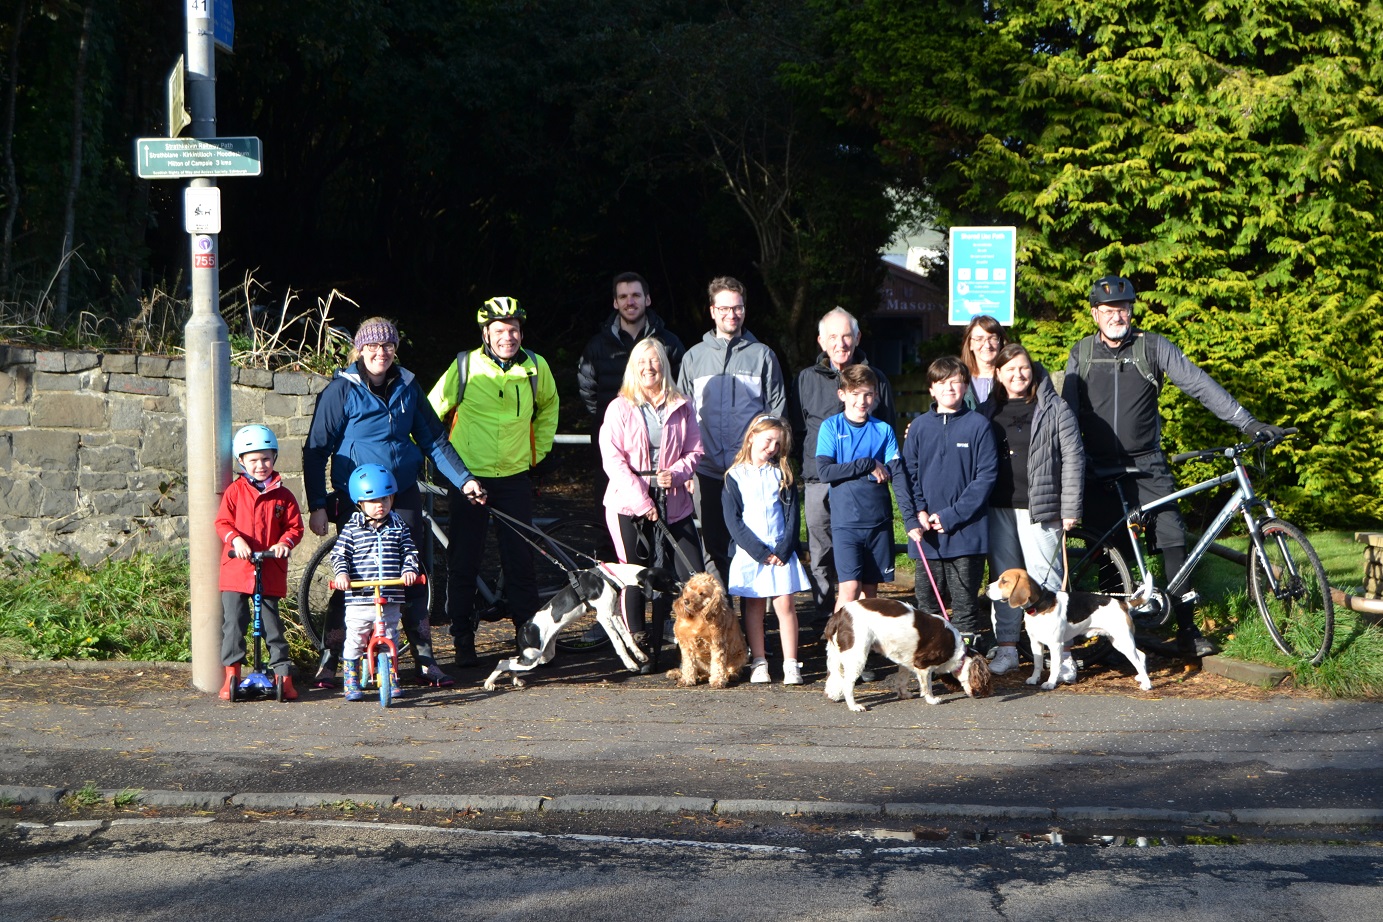 PUTTING THE PATH THROUGH ITS PACES: Cllr Paul Ferretti - Convener of Place, Neighbourhood and Corporate Assets - is pictured with members of the 'Walk, Run, Cycle in and around East Dunbartonshire' group and Christopher McGeough, the Council's Acting Team Leader - Traffic & Transport.